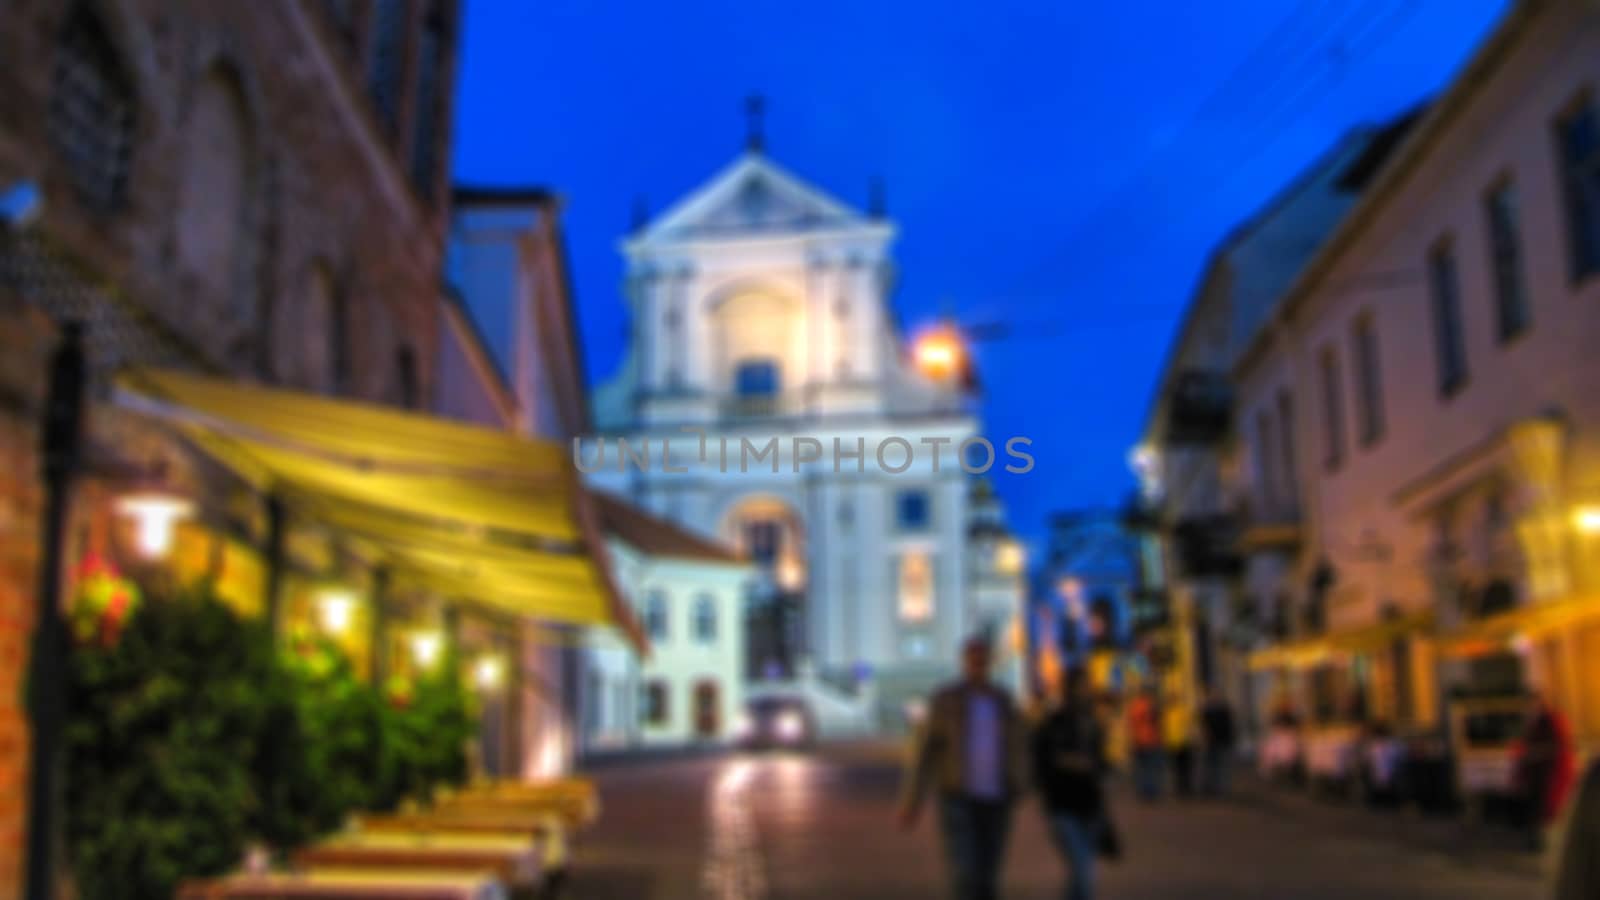 Blurred background. Evening city landscape, city street with lights and passers-by. Creative story for a background, poster, banner, or screensaver.
